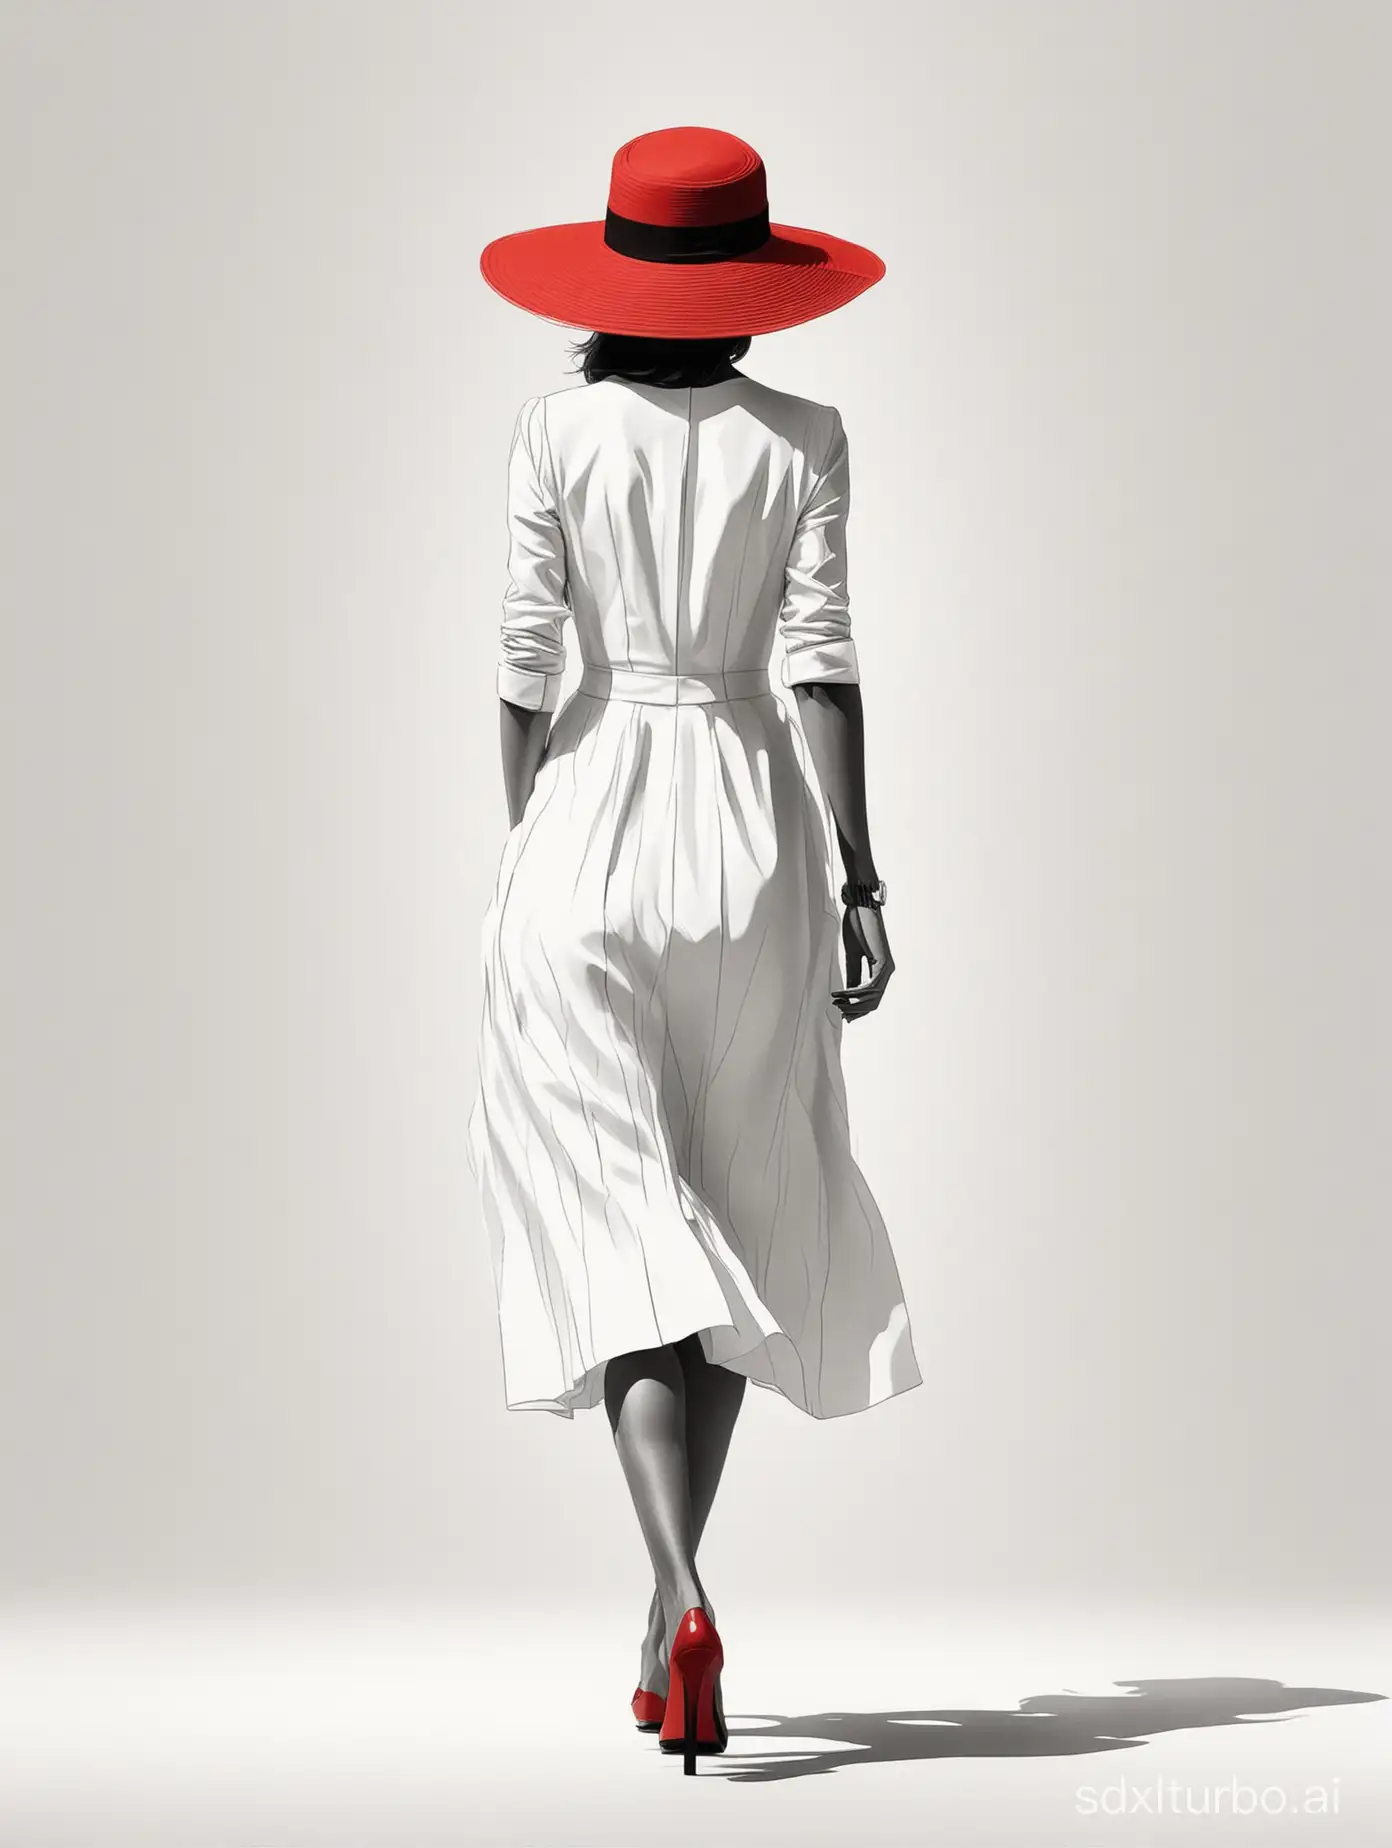 A woman in an elegant white dress and red hat walks along the runway, her silhouette outlined with bold lines against a clean background. The minimalist style captures every detail of her figure with simple shapes and clear lines, creating a sense of sophistication that resonates across all art forms. High resolution. Black line illustration in the style of on White Background.